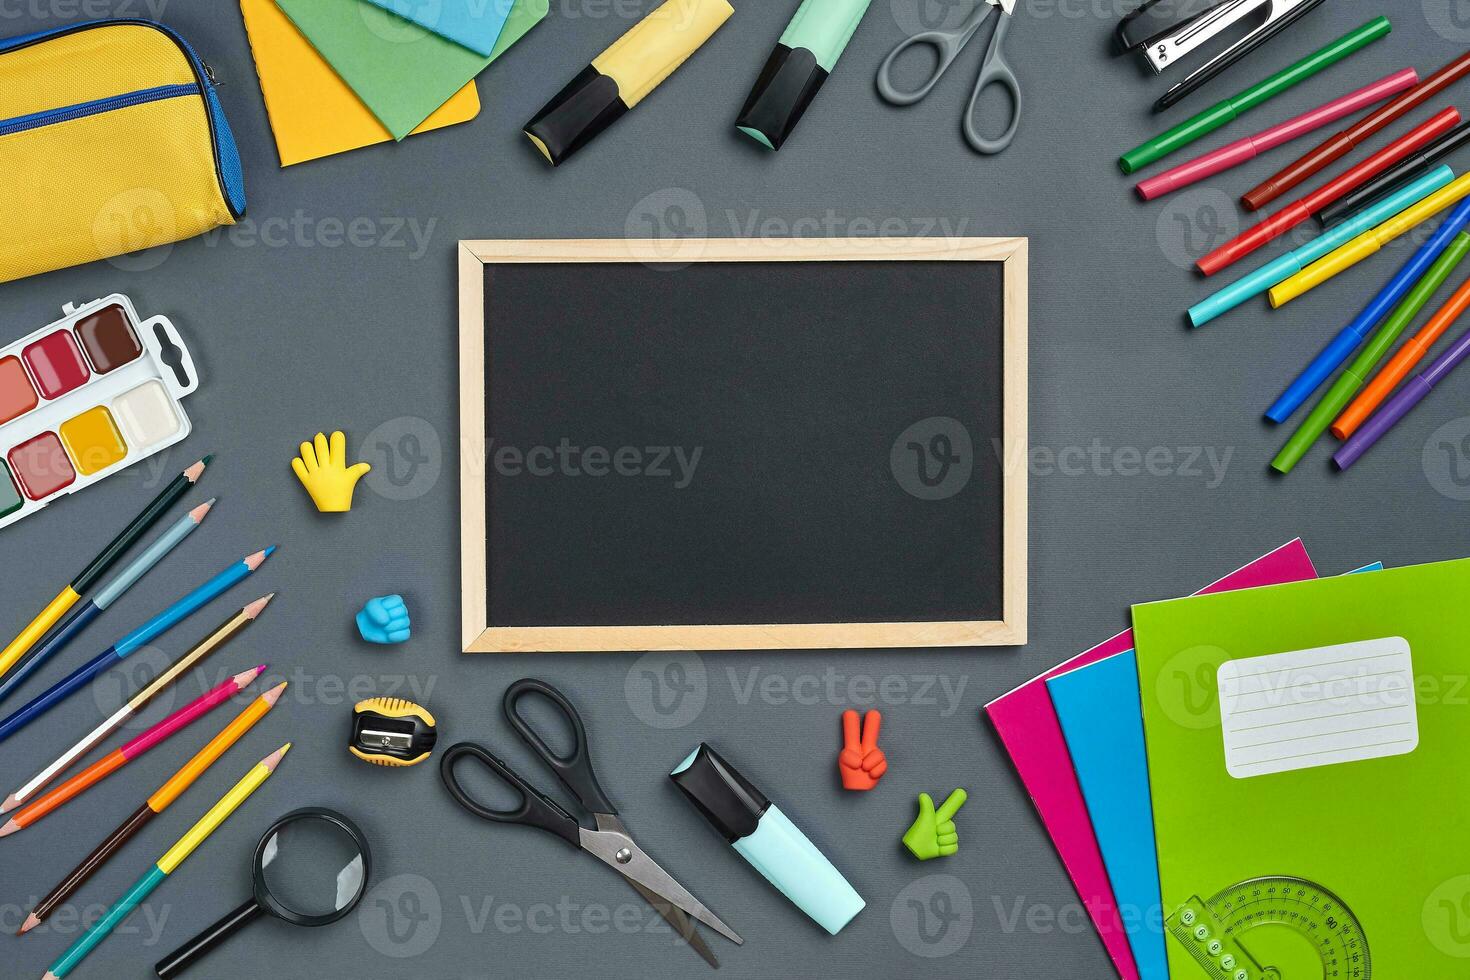 Flat lay photo of workspace desk with school accessories or office supplies on gray background.